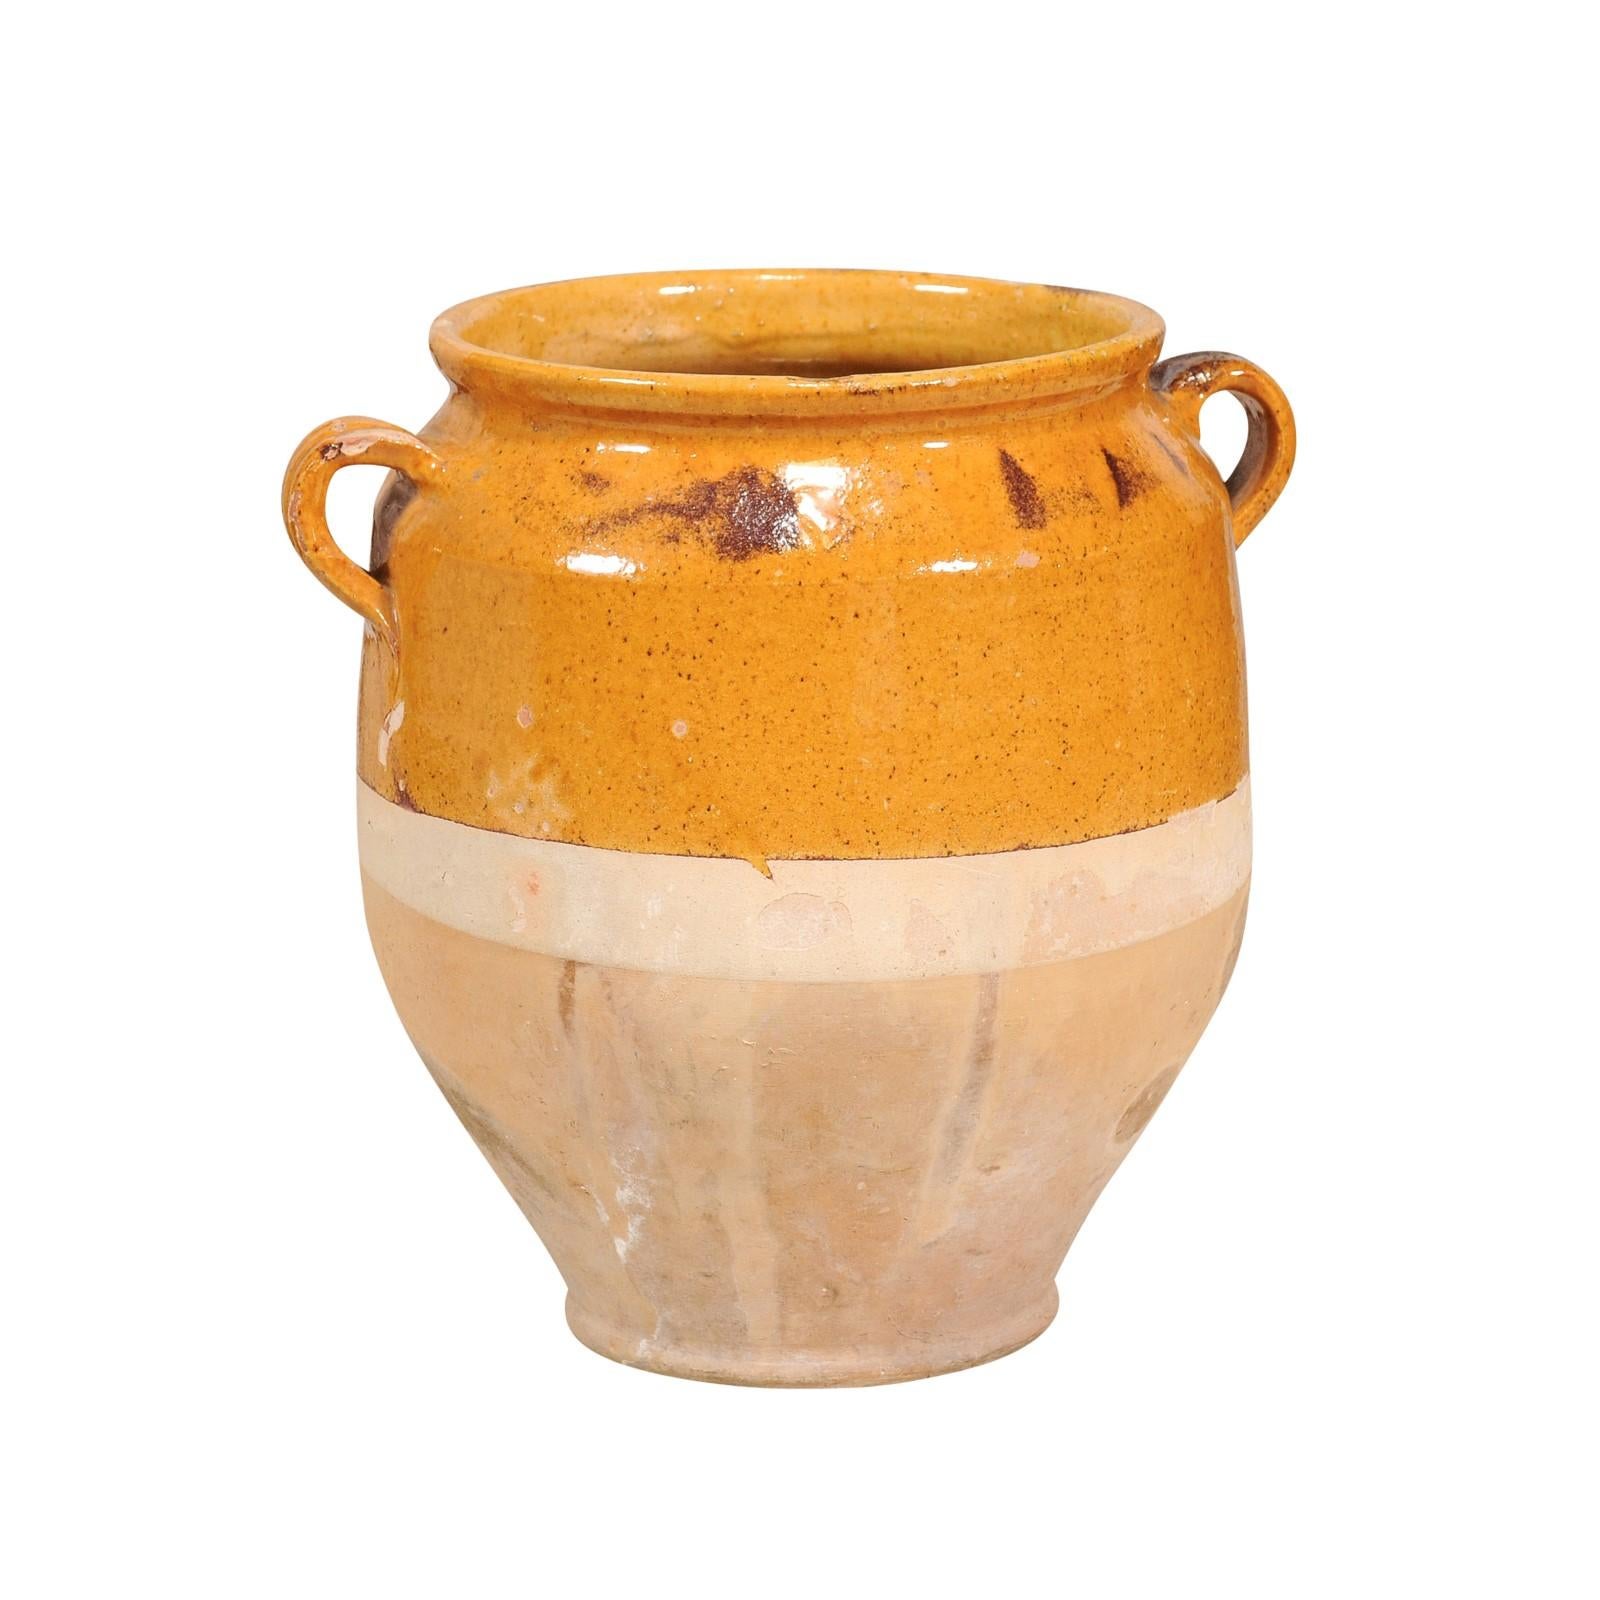 A French Provincial pot à confit pottery from the 20th century with yellow glaze, two lateral handles and rustic patina. This French Provincial pot à confit pottery piece from the 20th century is a charming representation of rustic French country